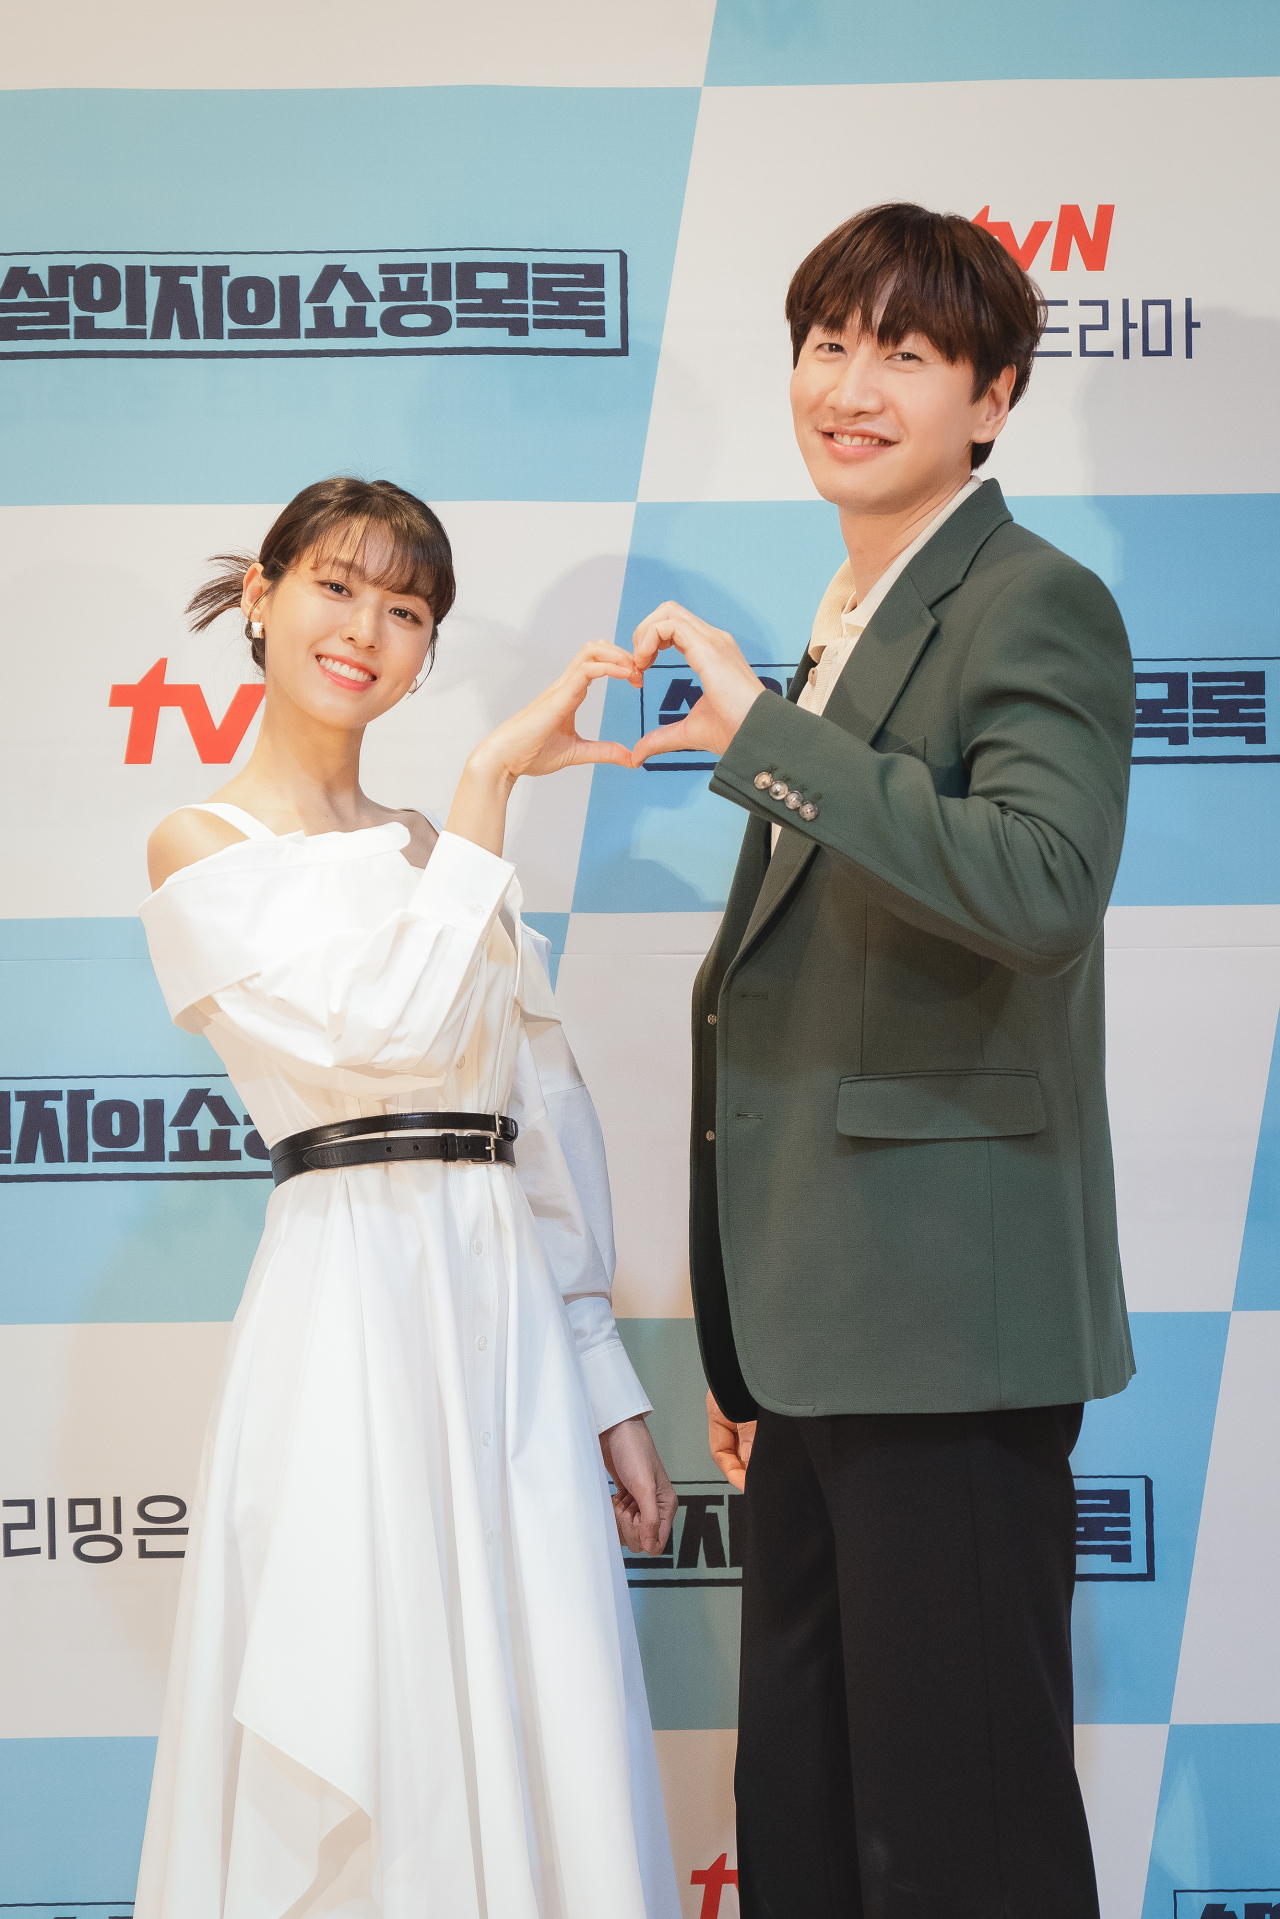 Actors Kim Seol-hyun (left) and Lee Kwang-soo pose for photos ahead of an online press conference for “The Killer's Shopping List” on Monday.  (tvN)